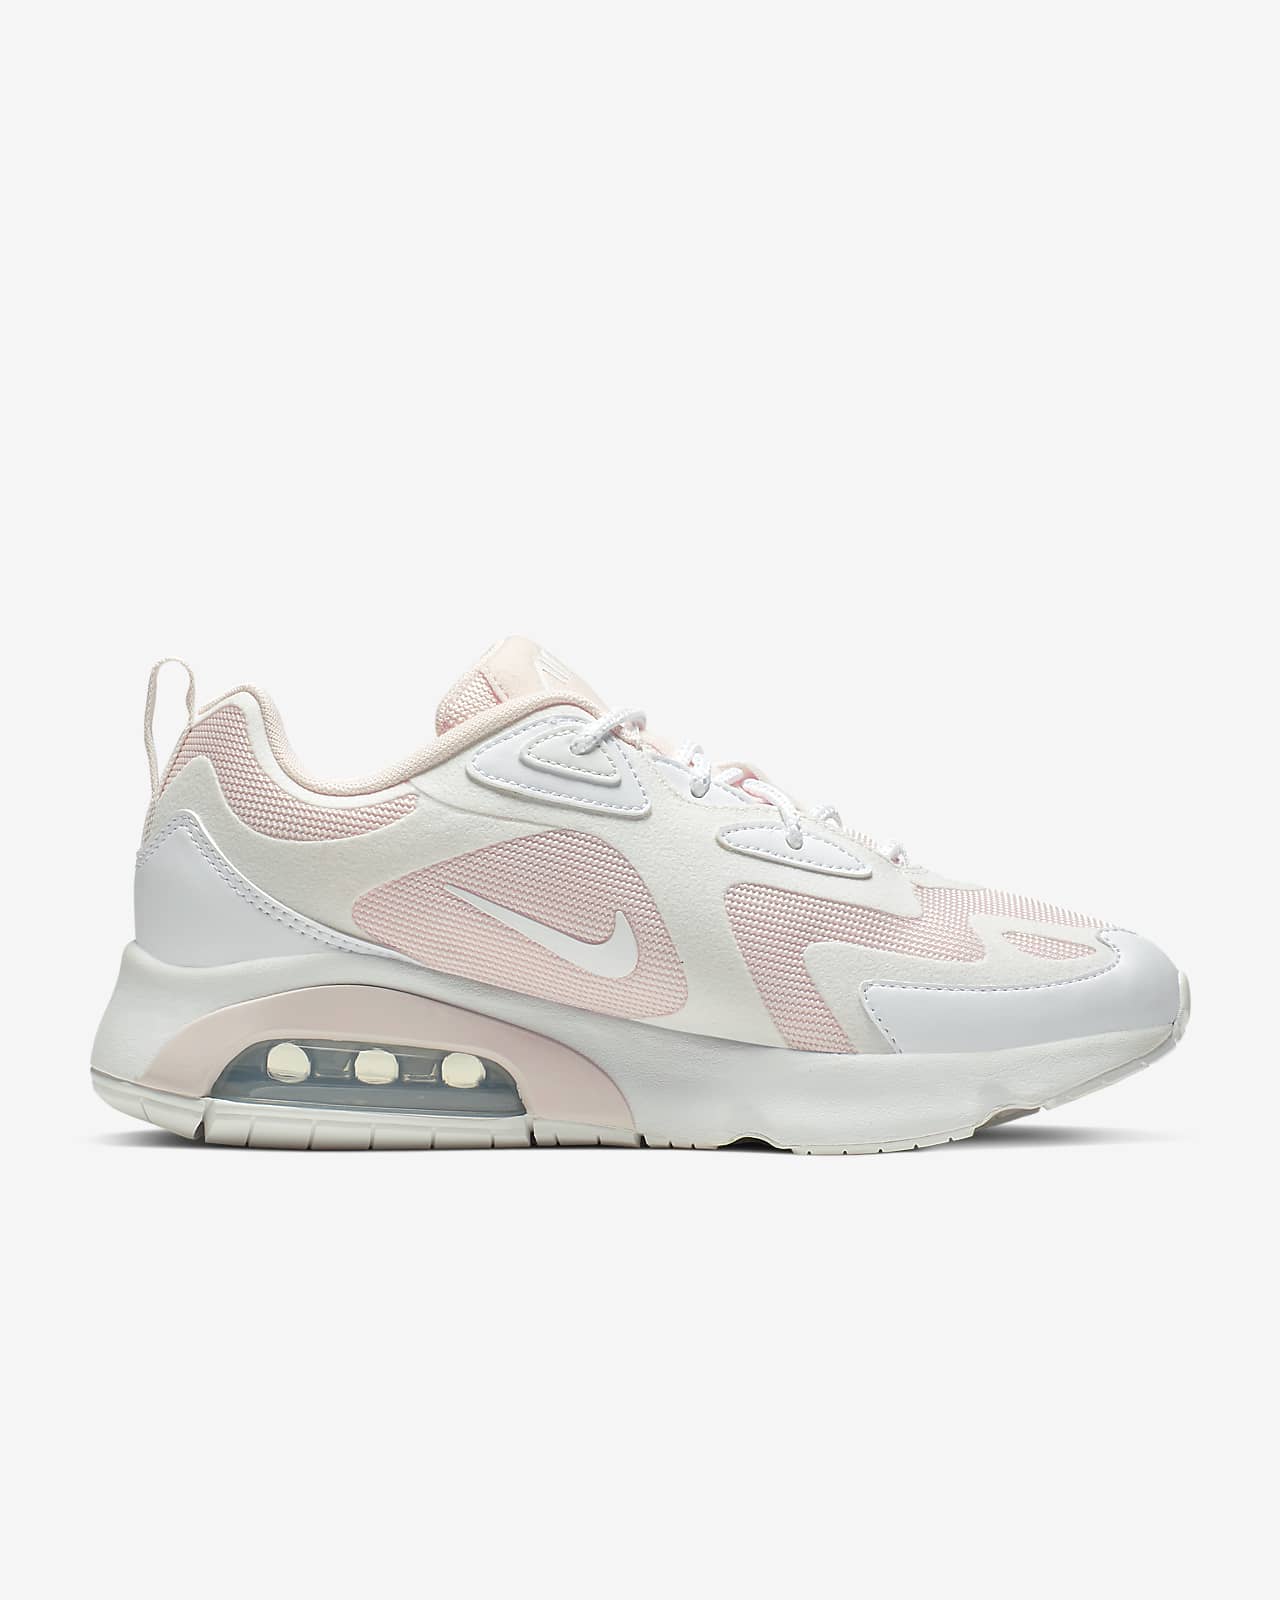 nike air max womens white and pink